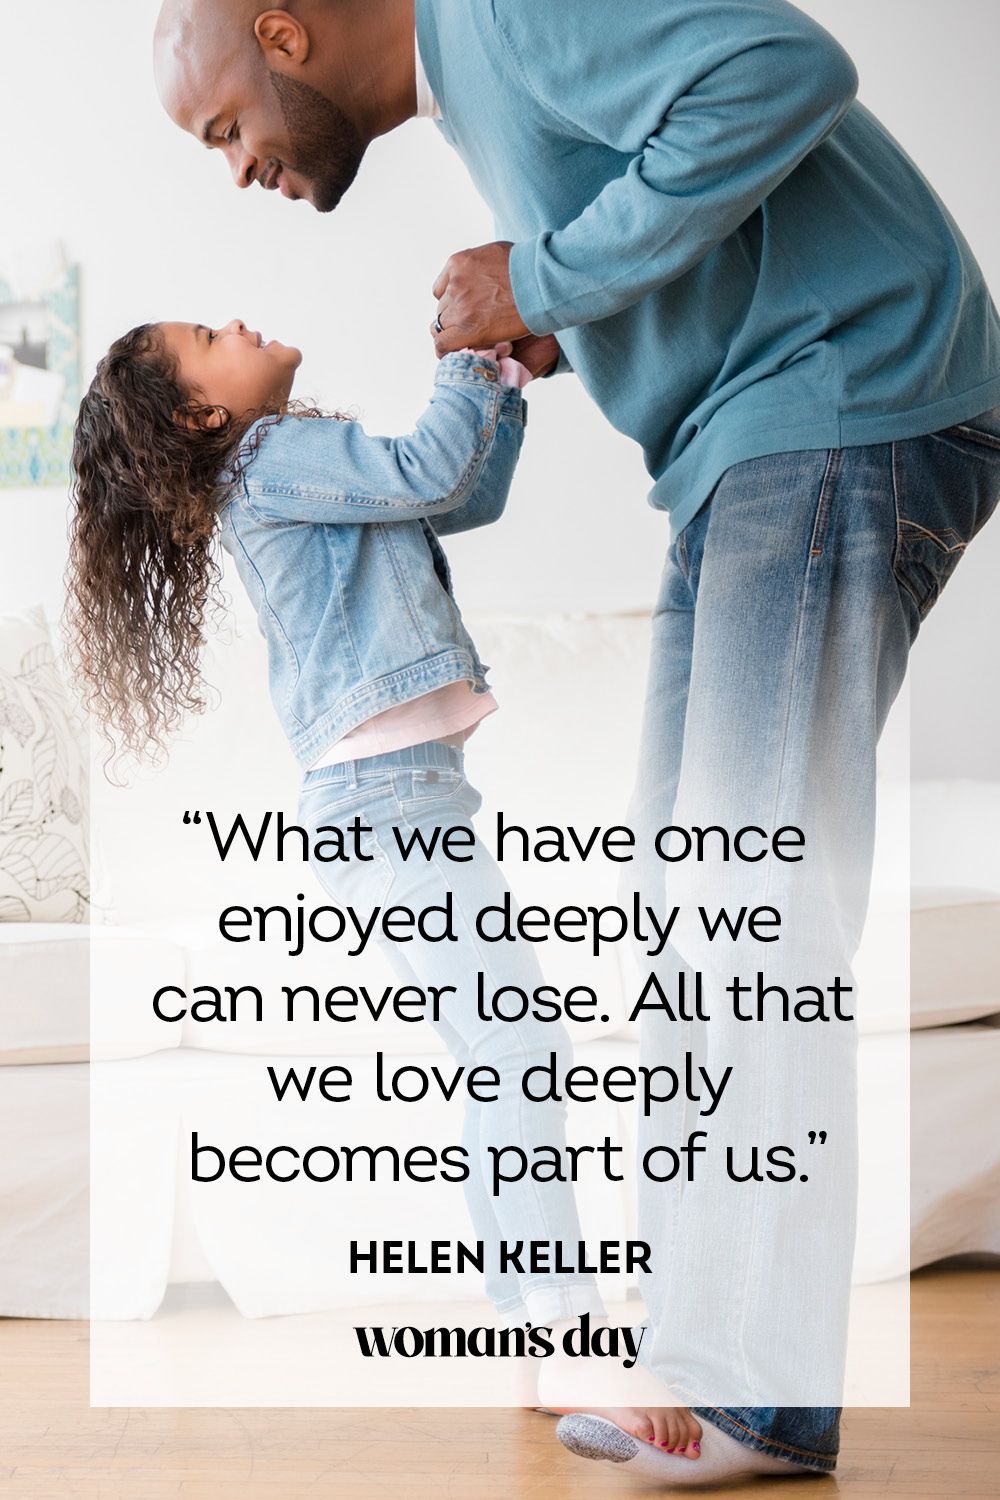 dad passing away quotes from daughter